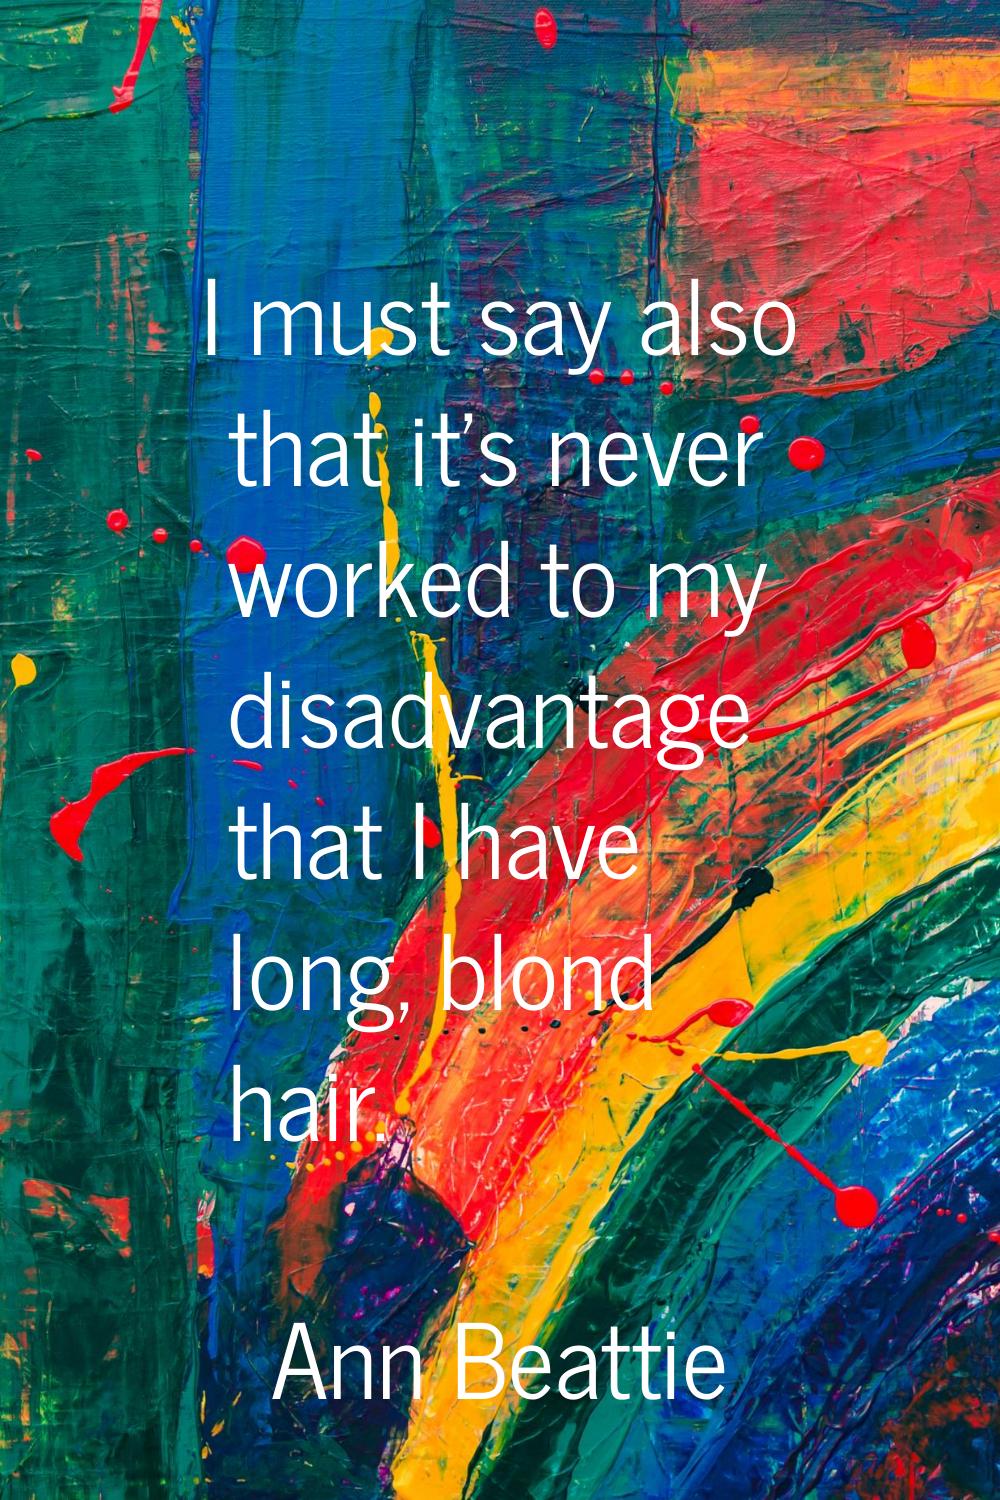 I must say also that it's never worked to my disadvantage that I have long, blond hair.